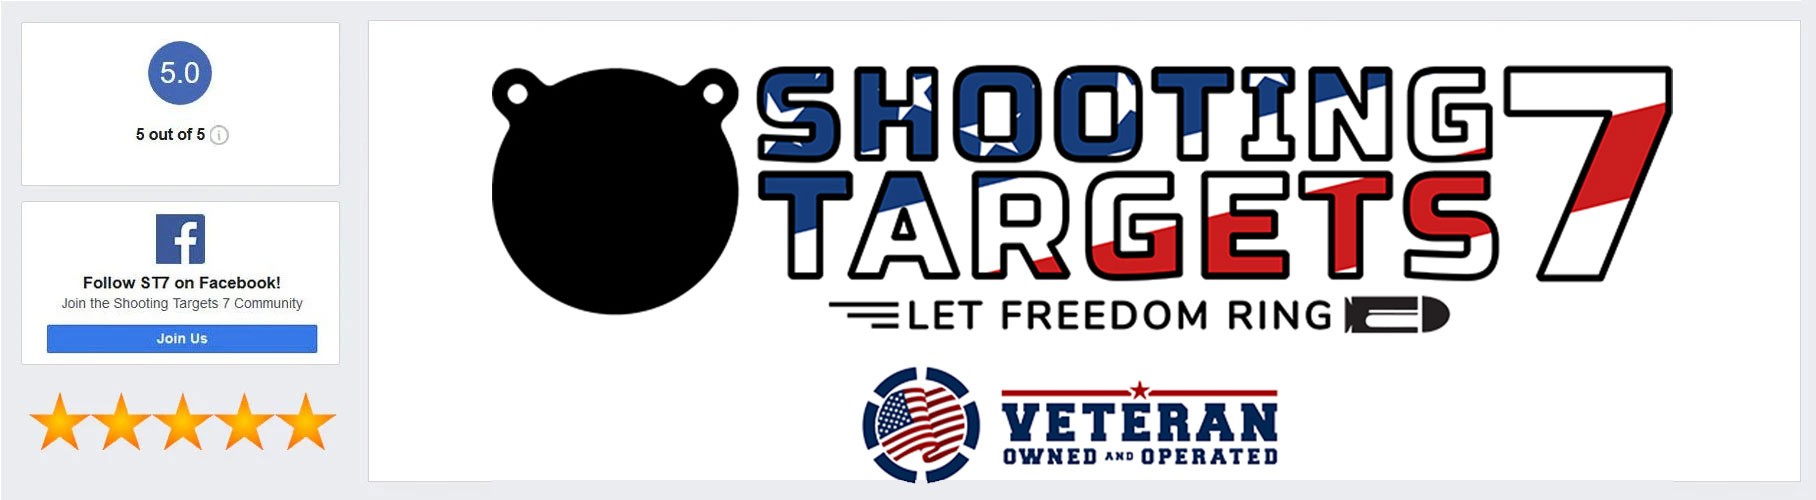 Shooting Targets 7 Review